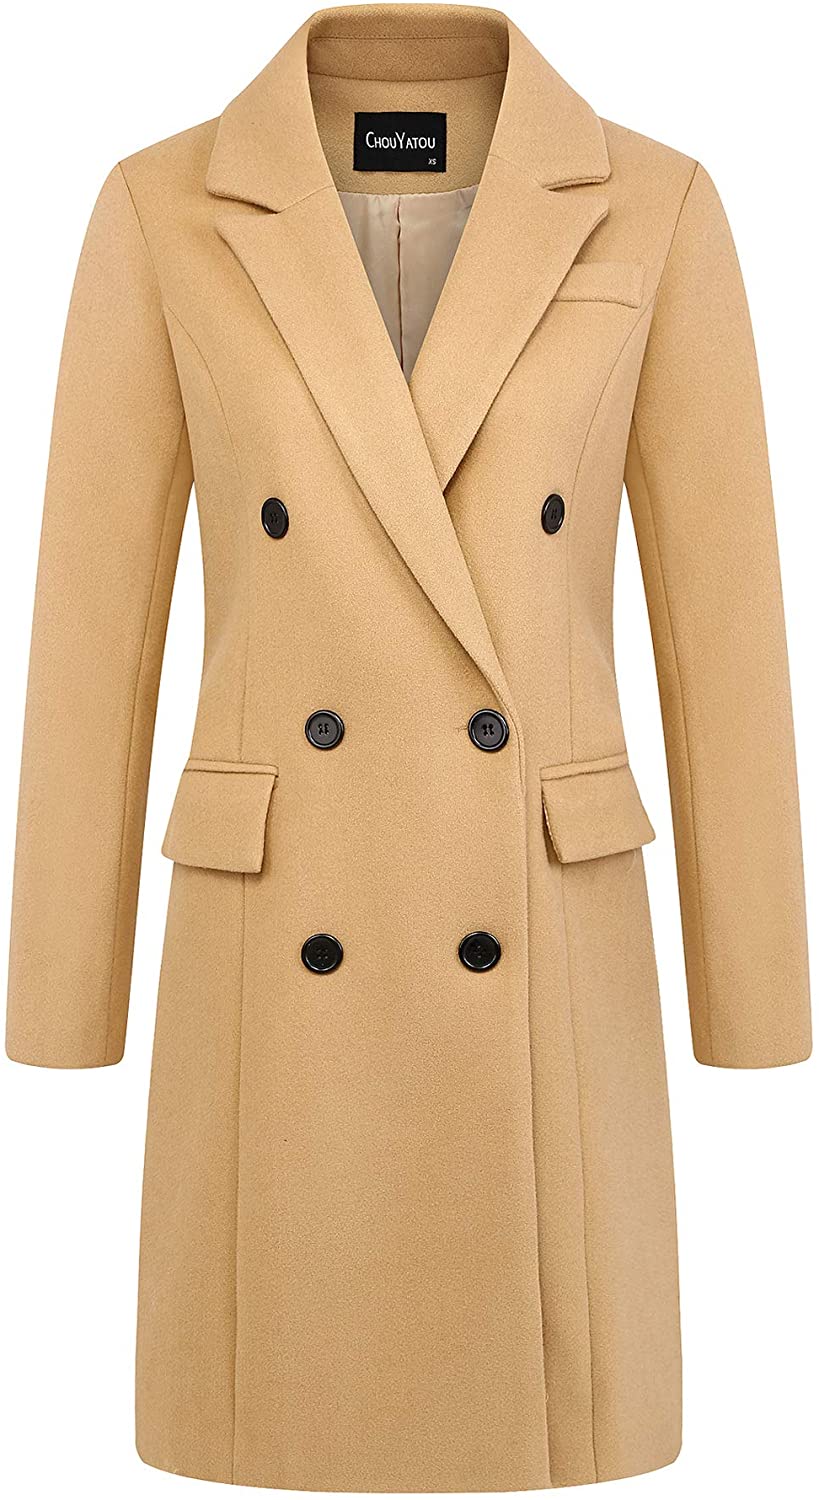 chouyatou Women's Basic Essential Double Breasted Mid-Long Wool Blend Pea Coat